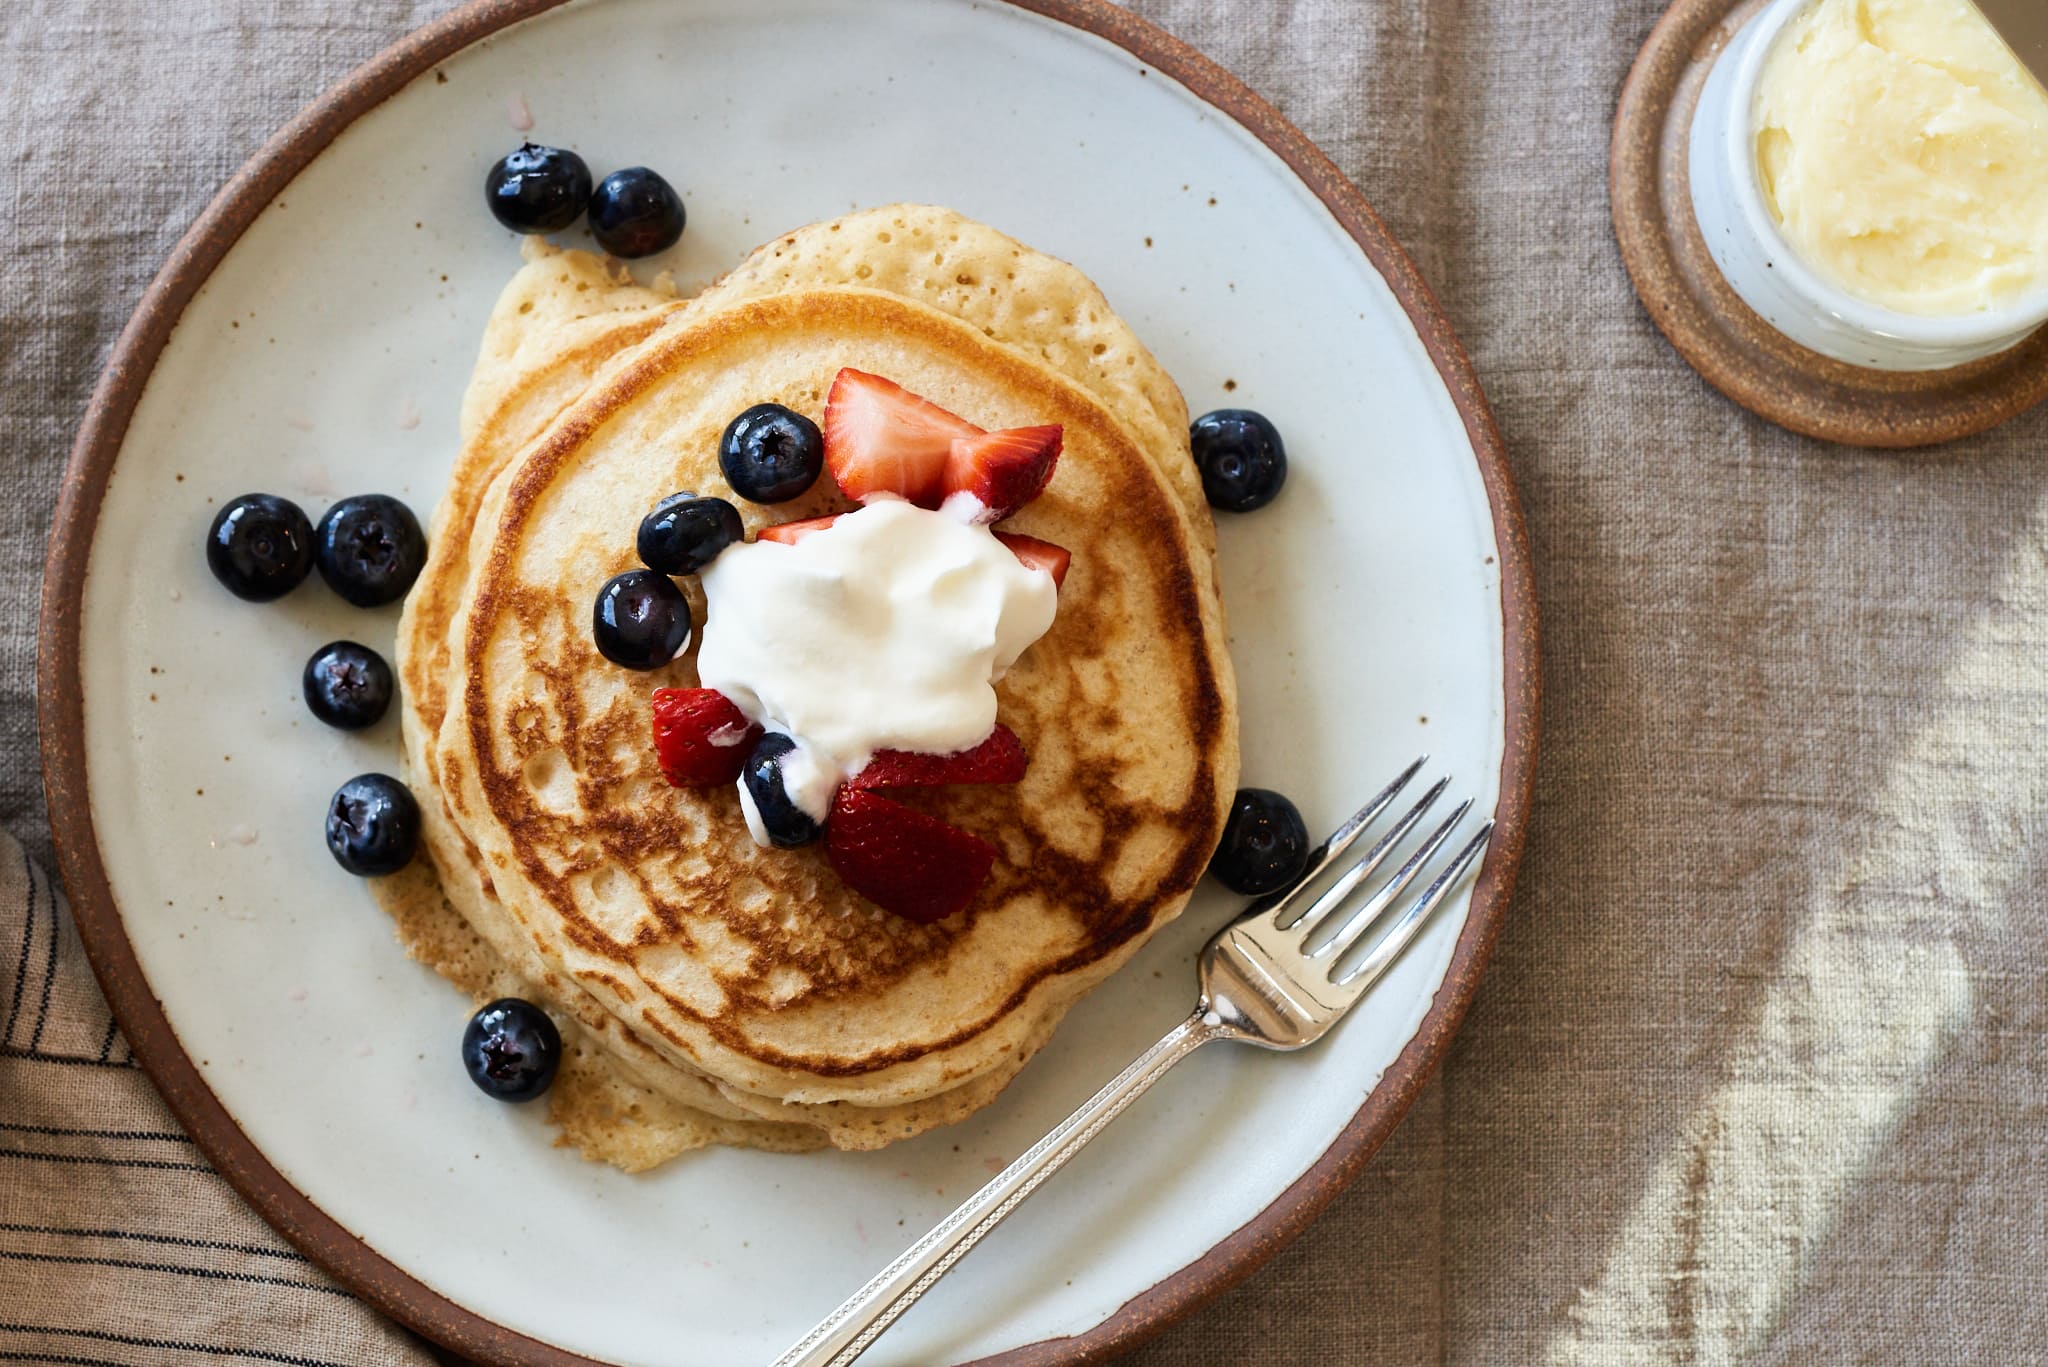 https://www.theperfectloaf.com/wp-content/uploads/2023/02/theperfectloaf_sourdough_pancakes-1.jpg